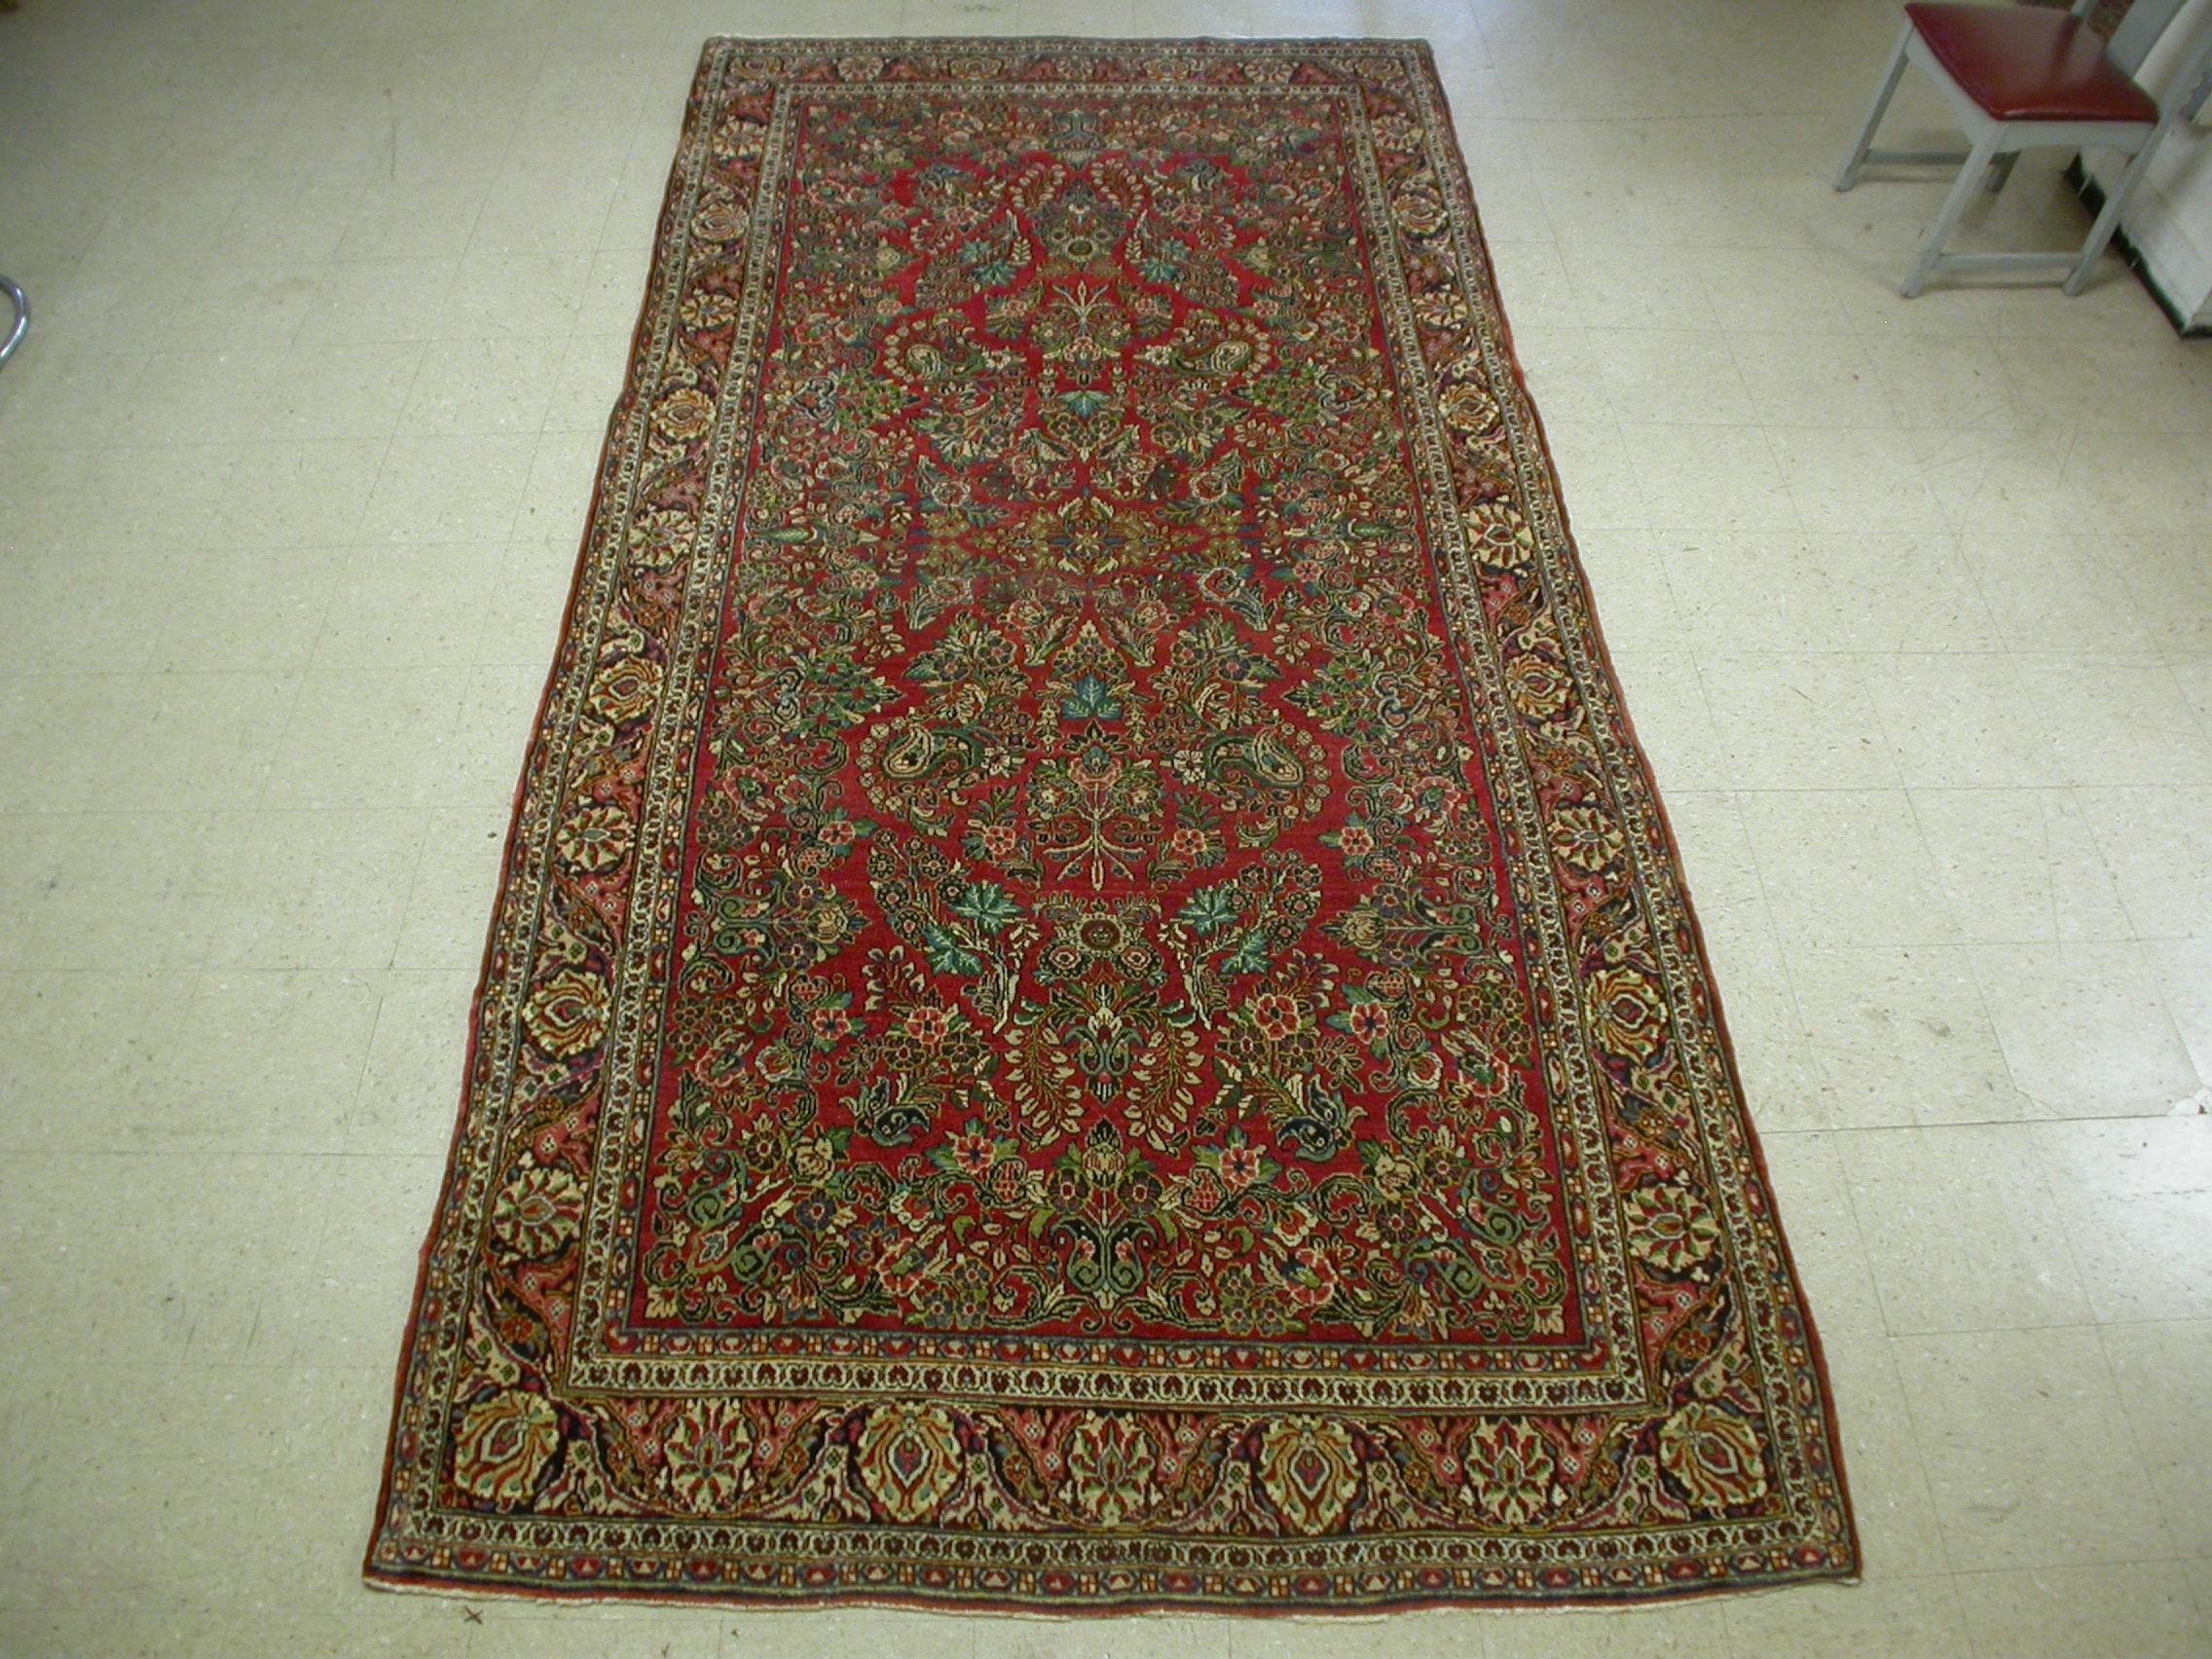 Sarouk Farahan Antique Persian Floral Red and Gold Sarouk Area Rug, c. 1920s For Sale